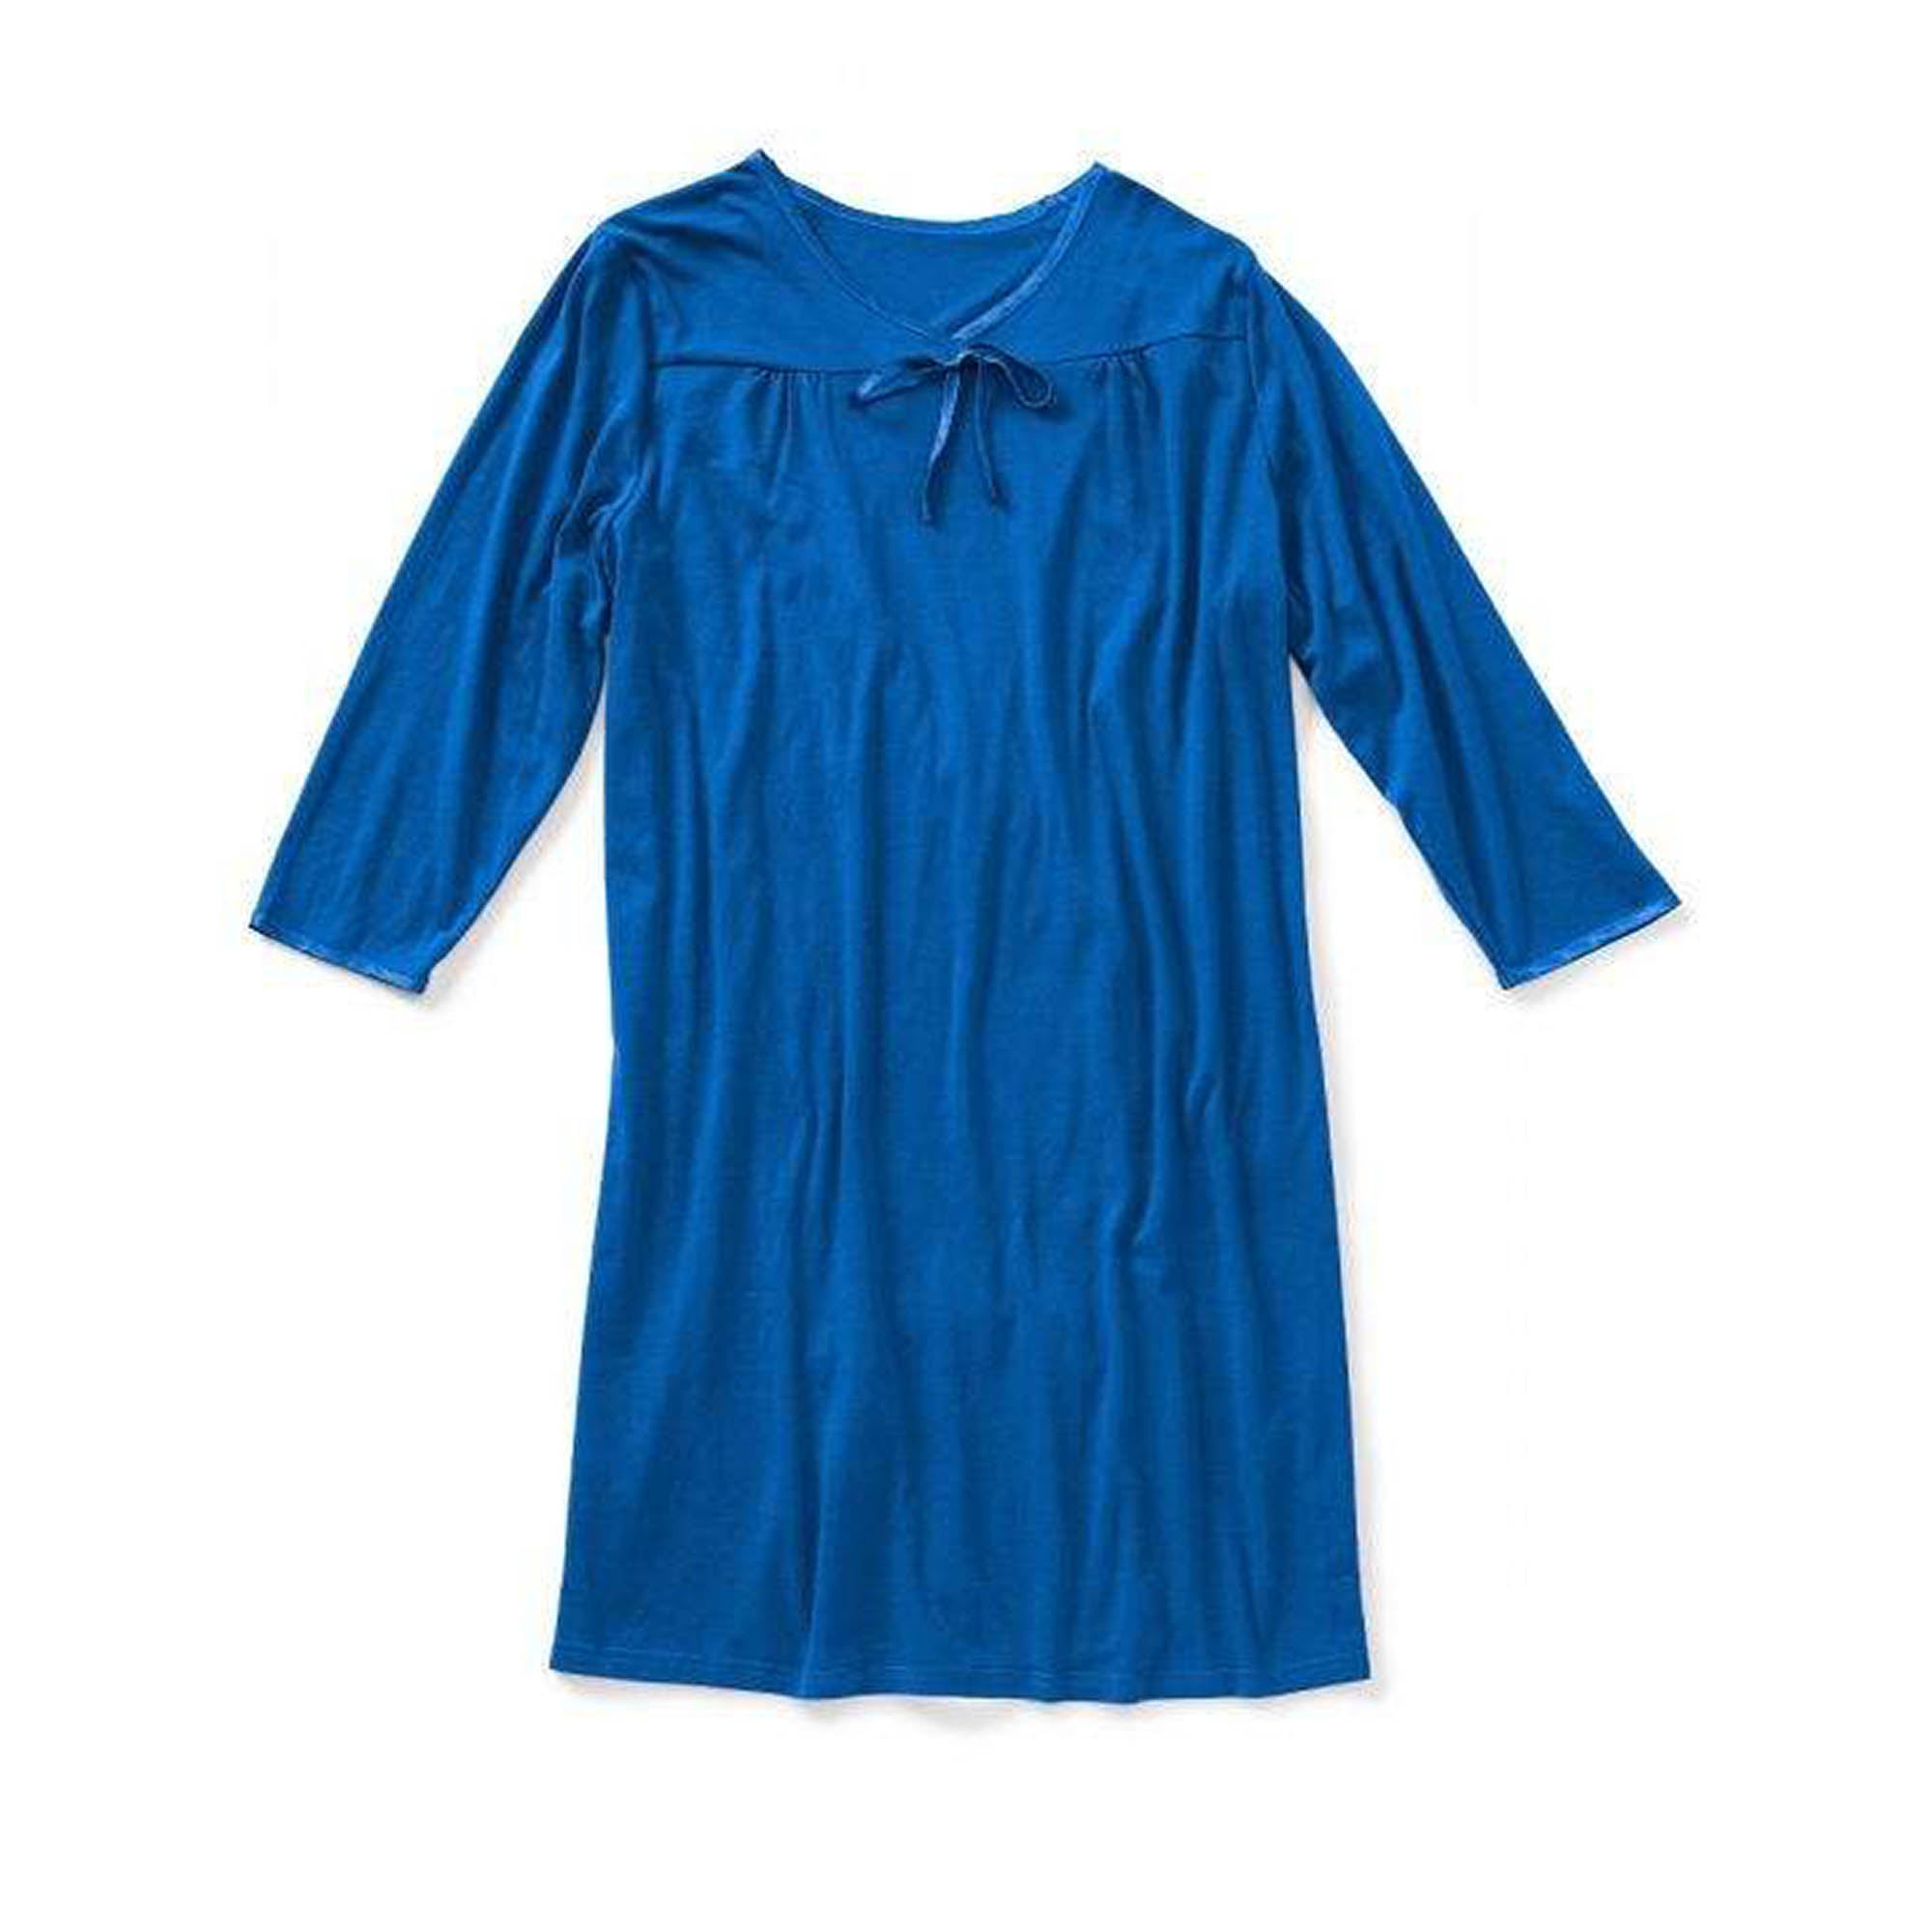 Silverts Women's Open Back Antimicrobial Long-sleeve Nightgown - Adaptive Clothing - Blue - L